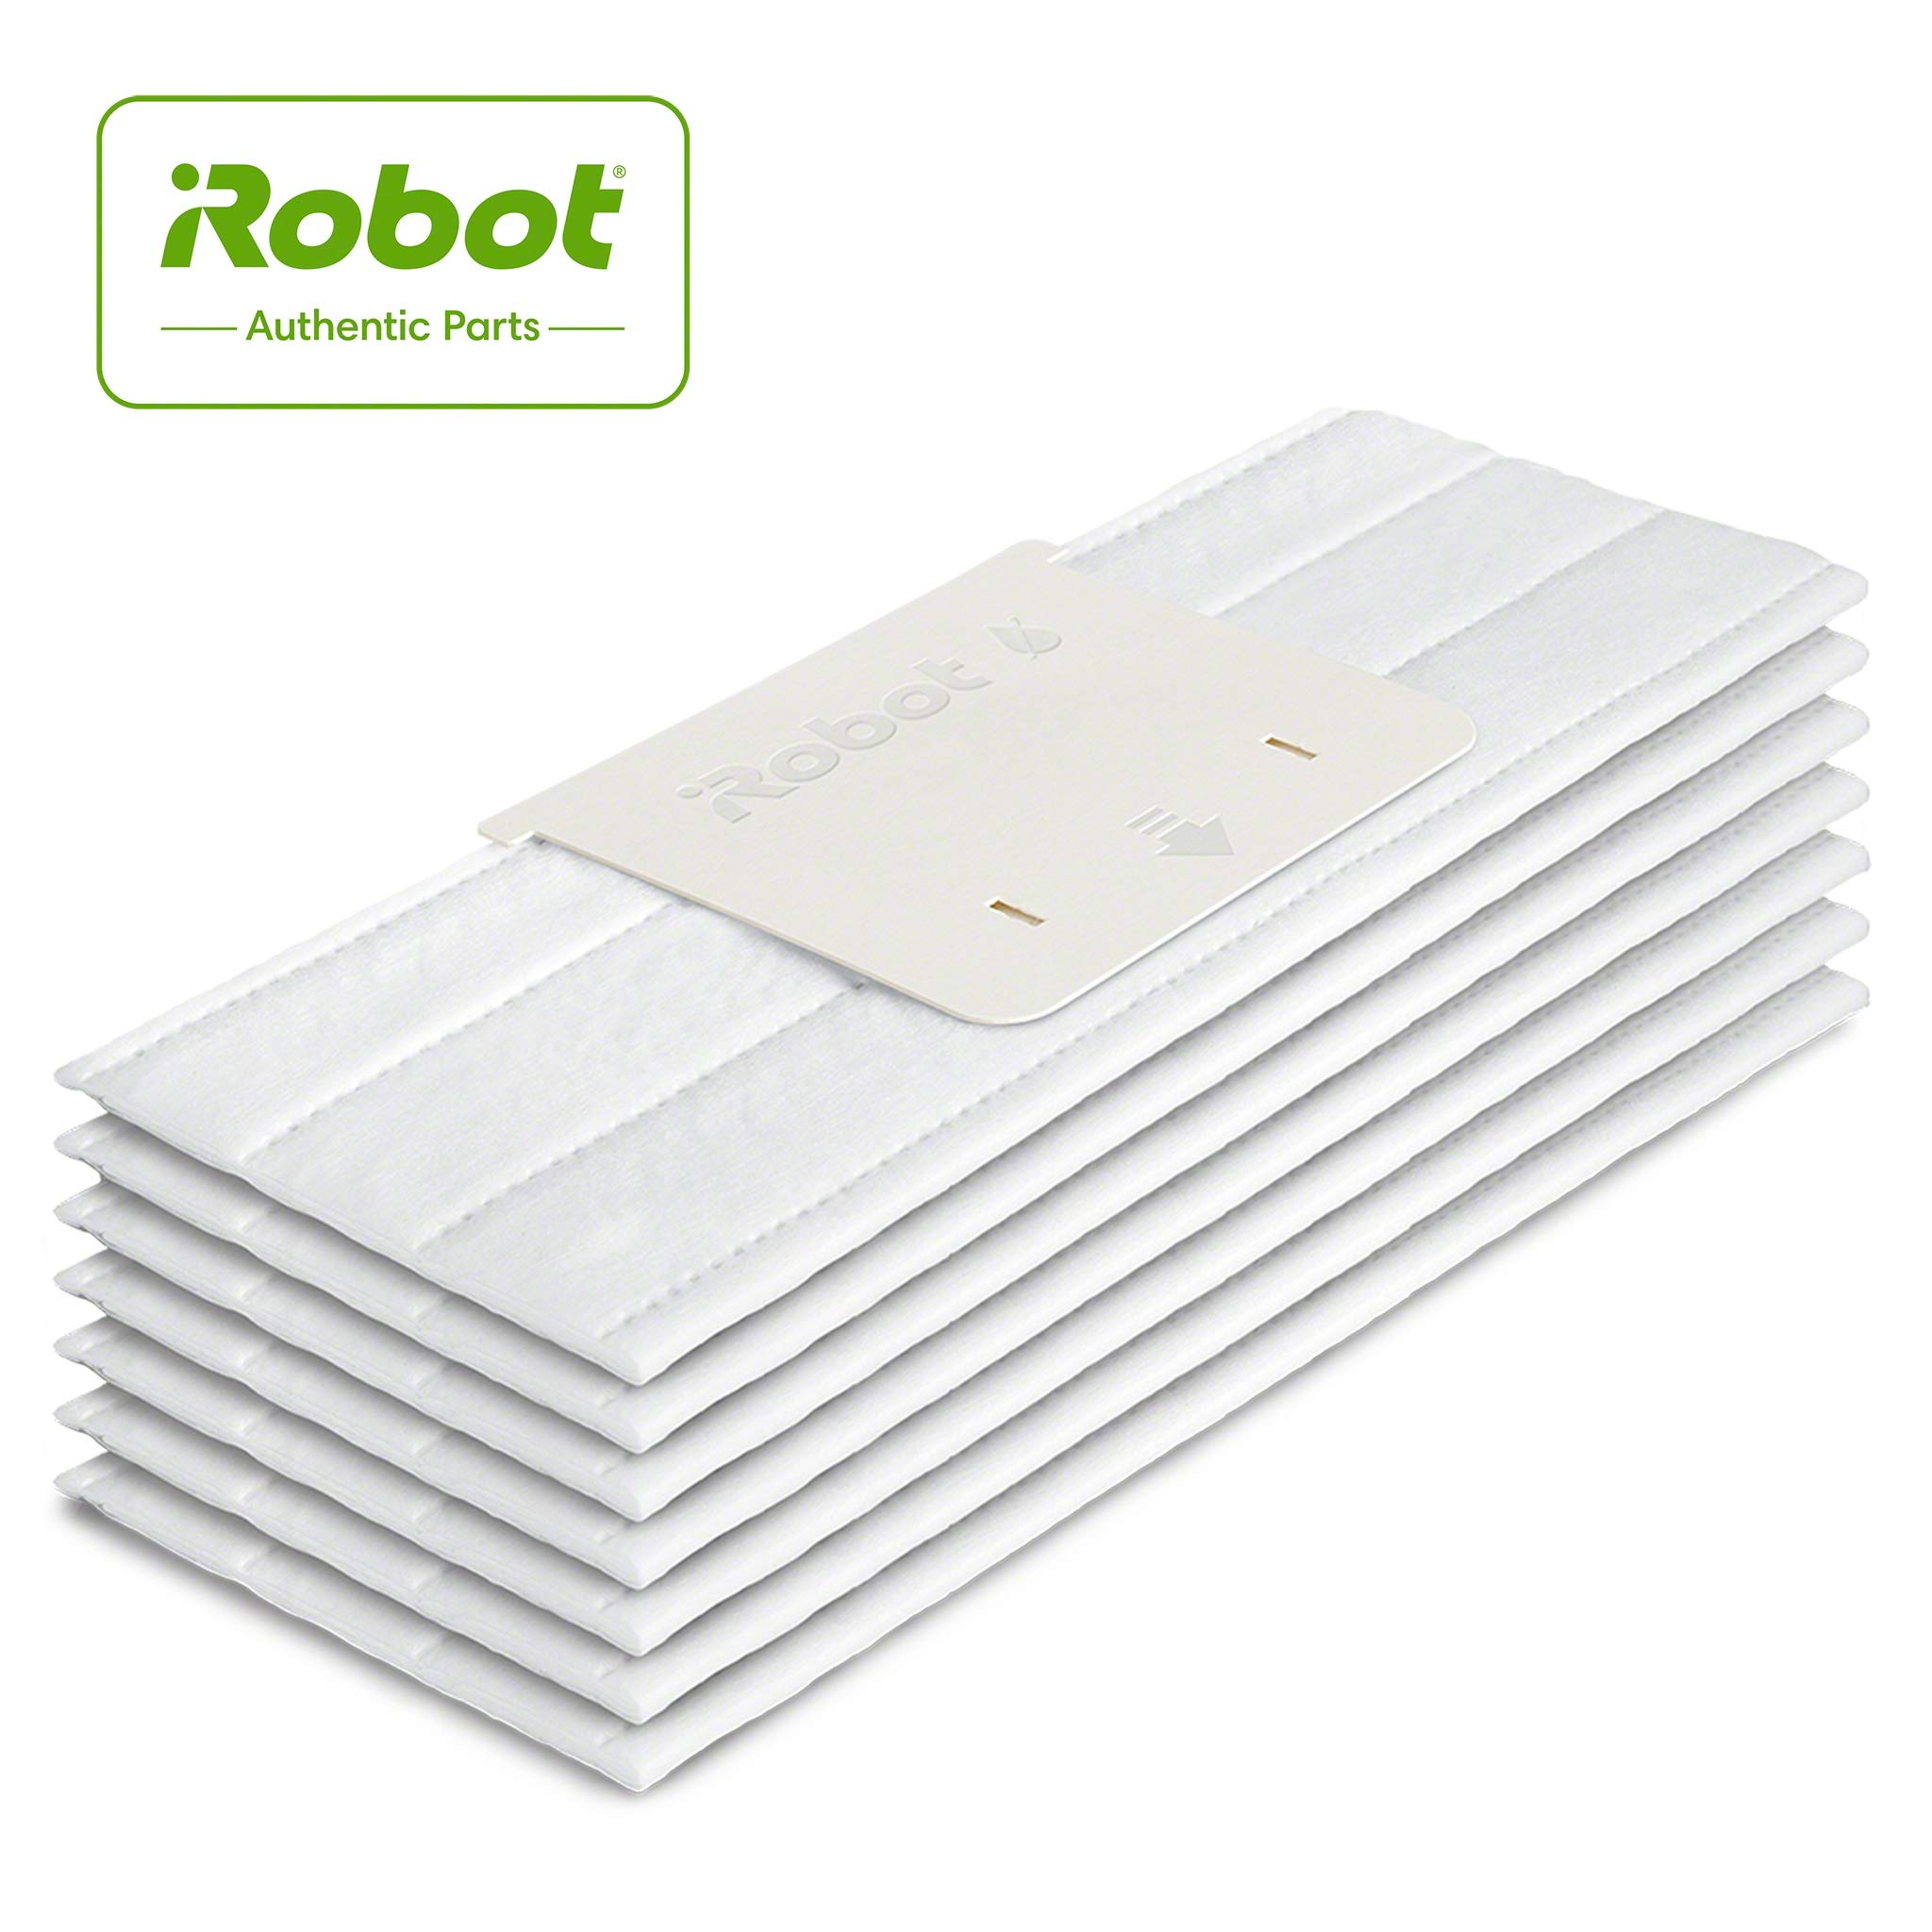 iRobot® Authentic Replacement Parts- Braava Jet® m Series Dry Sweeping Pads, (7-Pack)